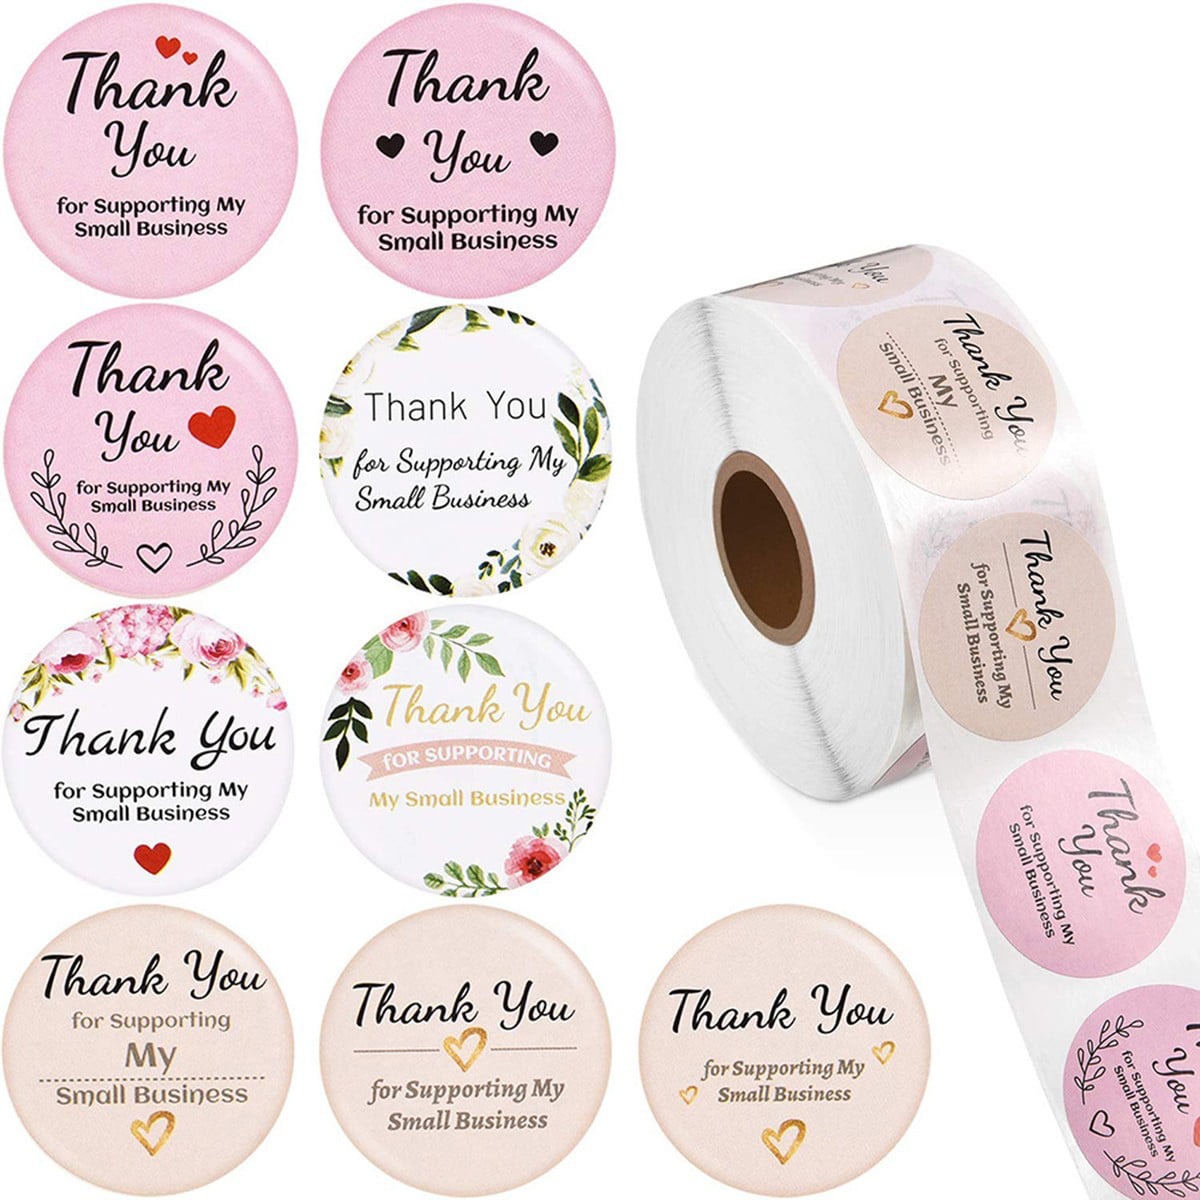 2 Roll of 1000 Pcs Assorted Floral Thank You Stickers Round Sealing Labels Decor 